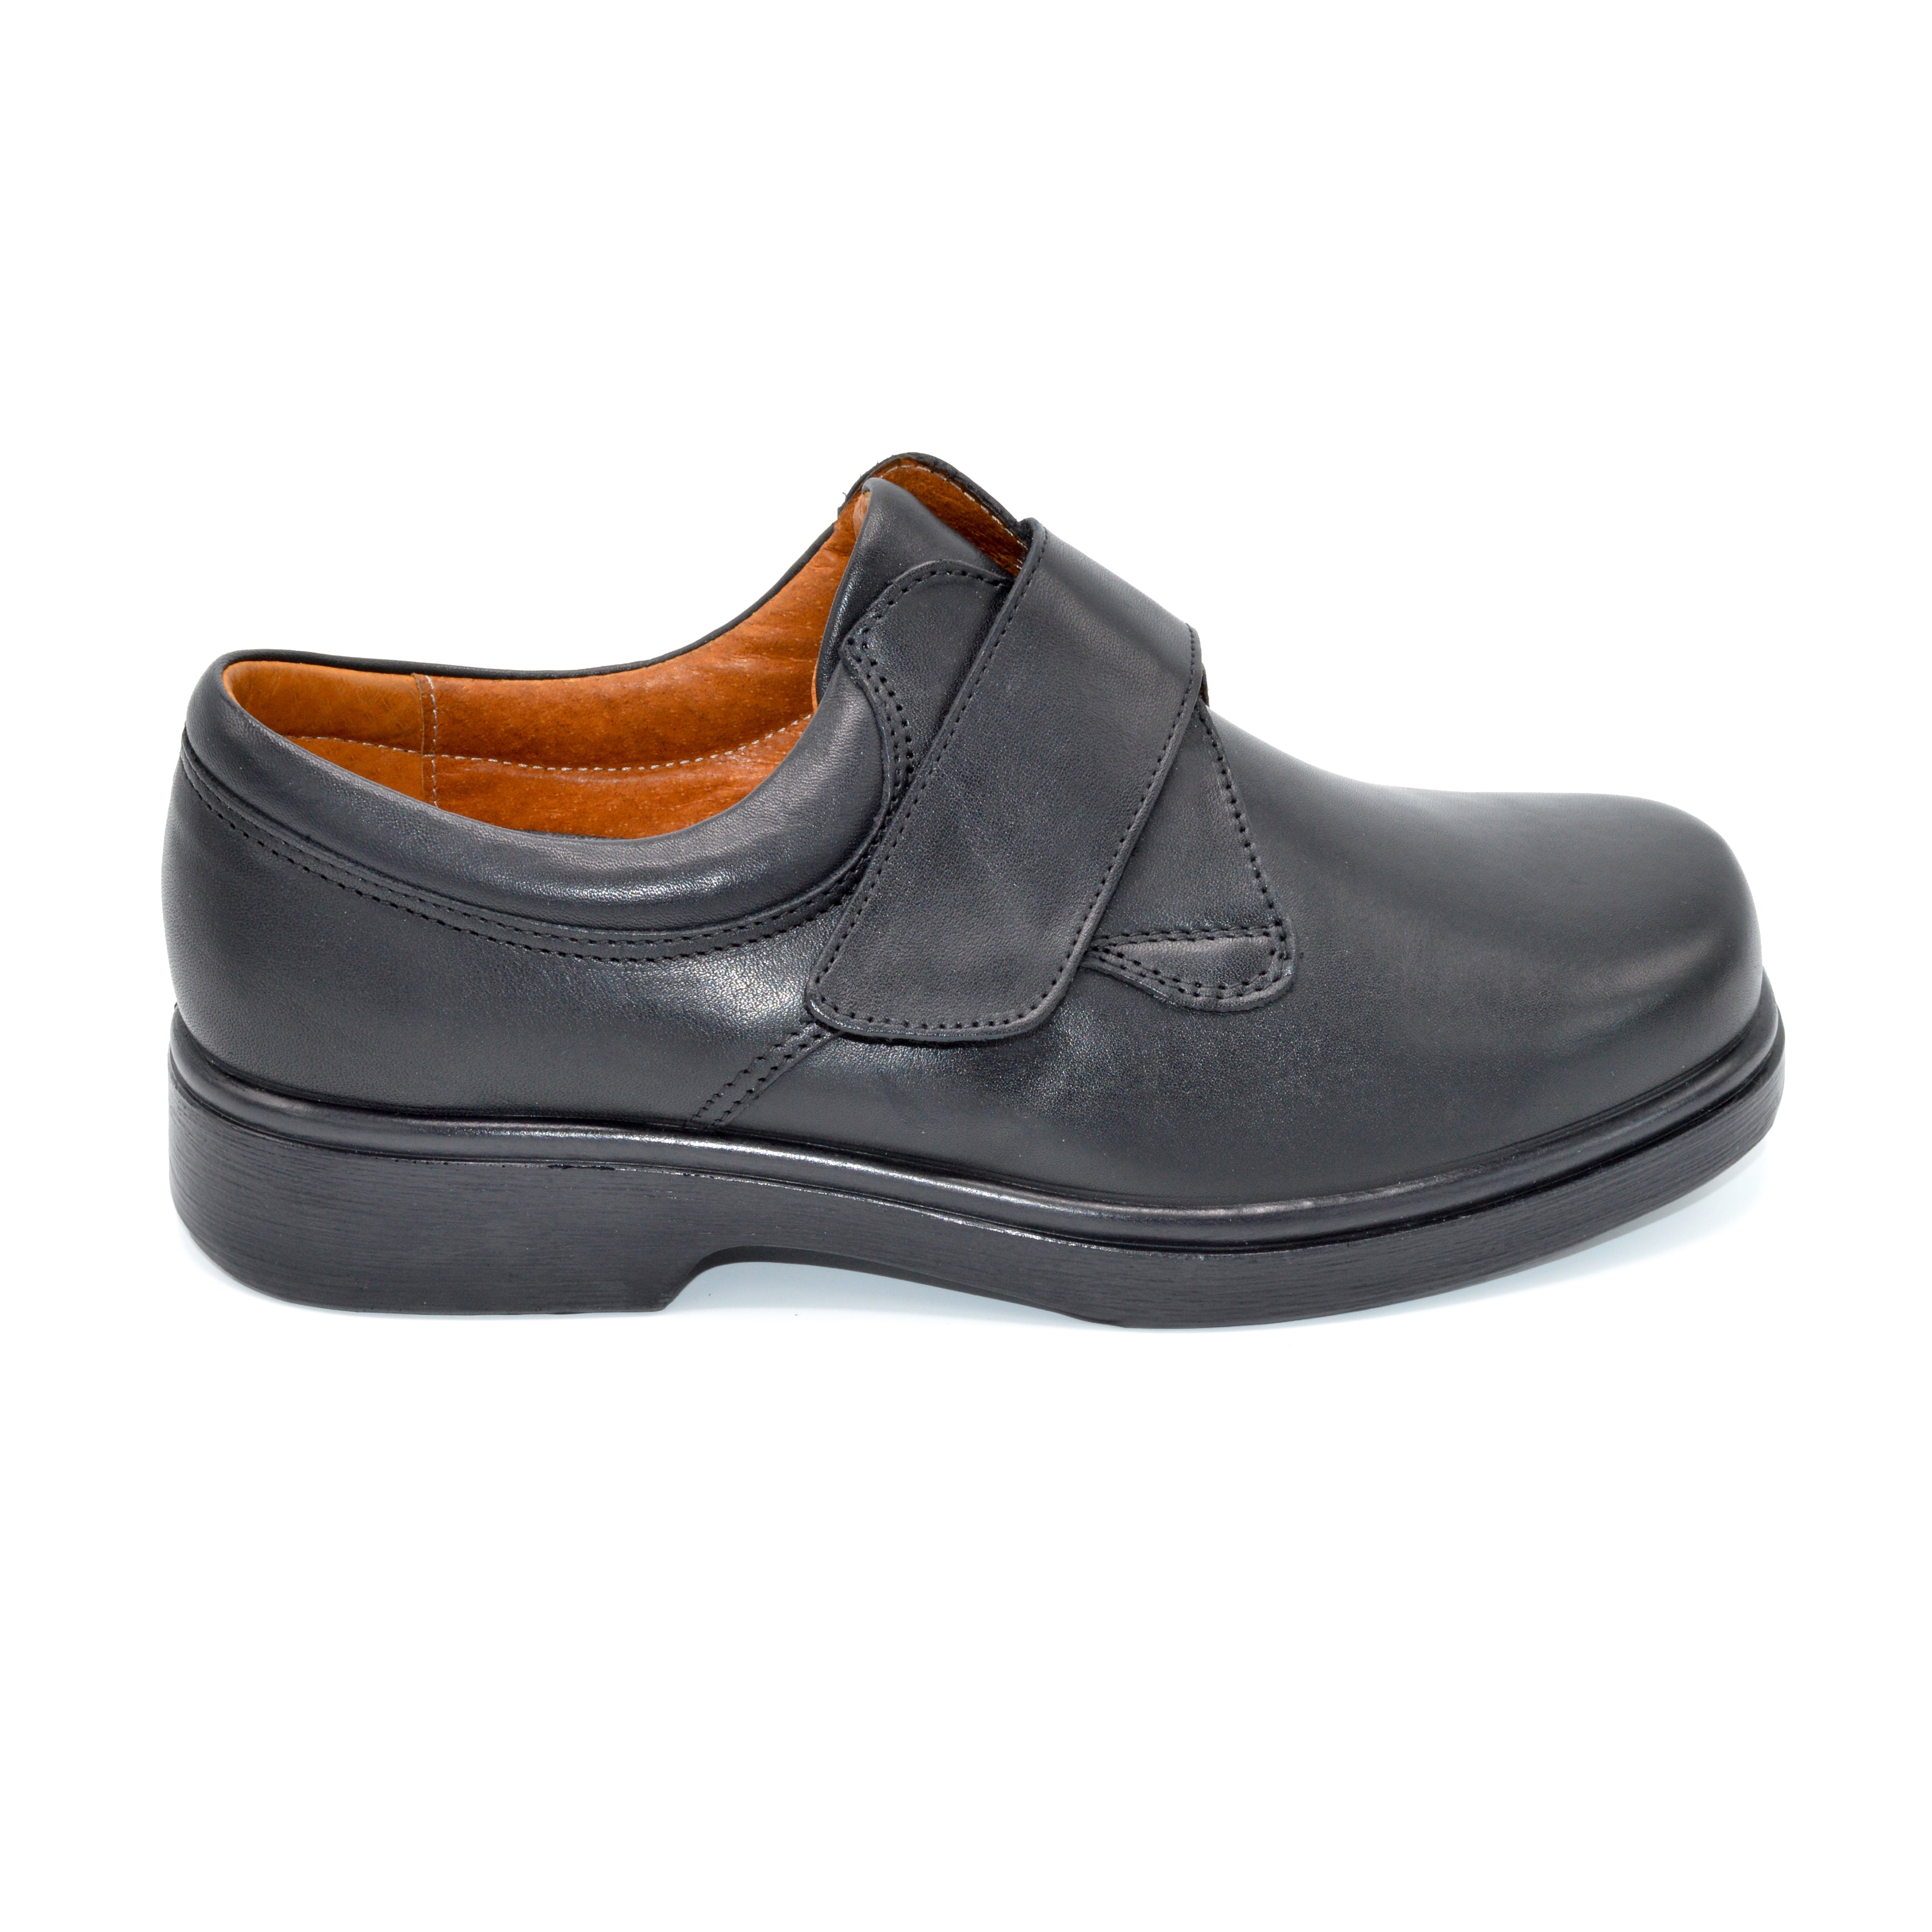 DB Mens Extra Wide Work Shoe